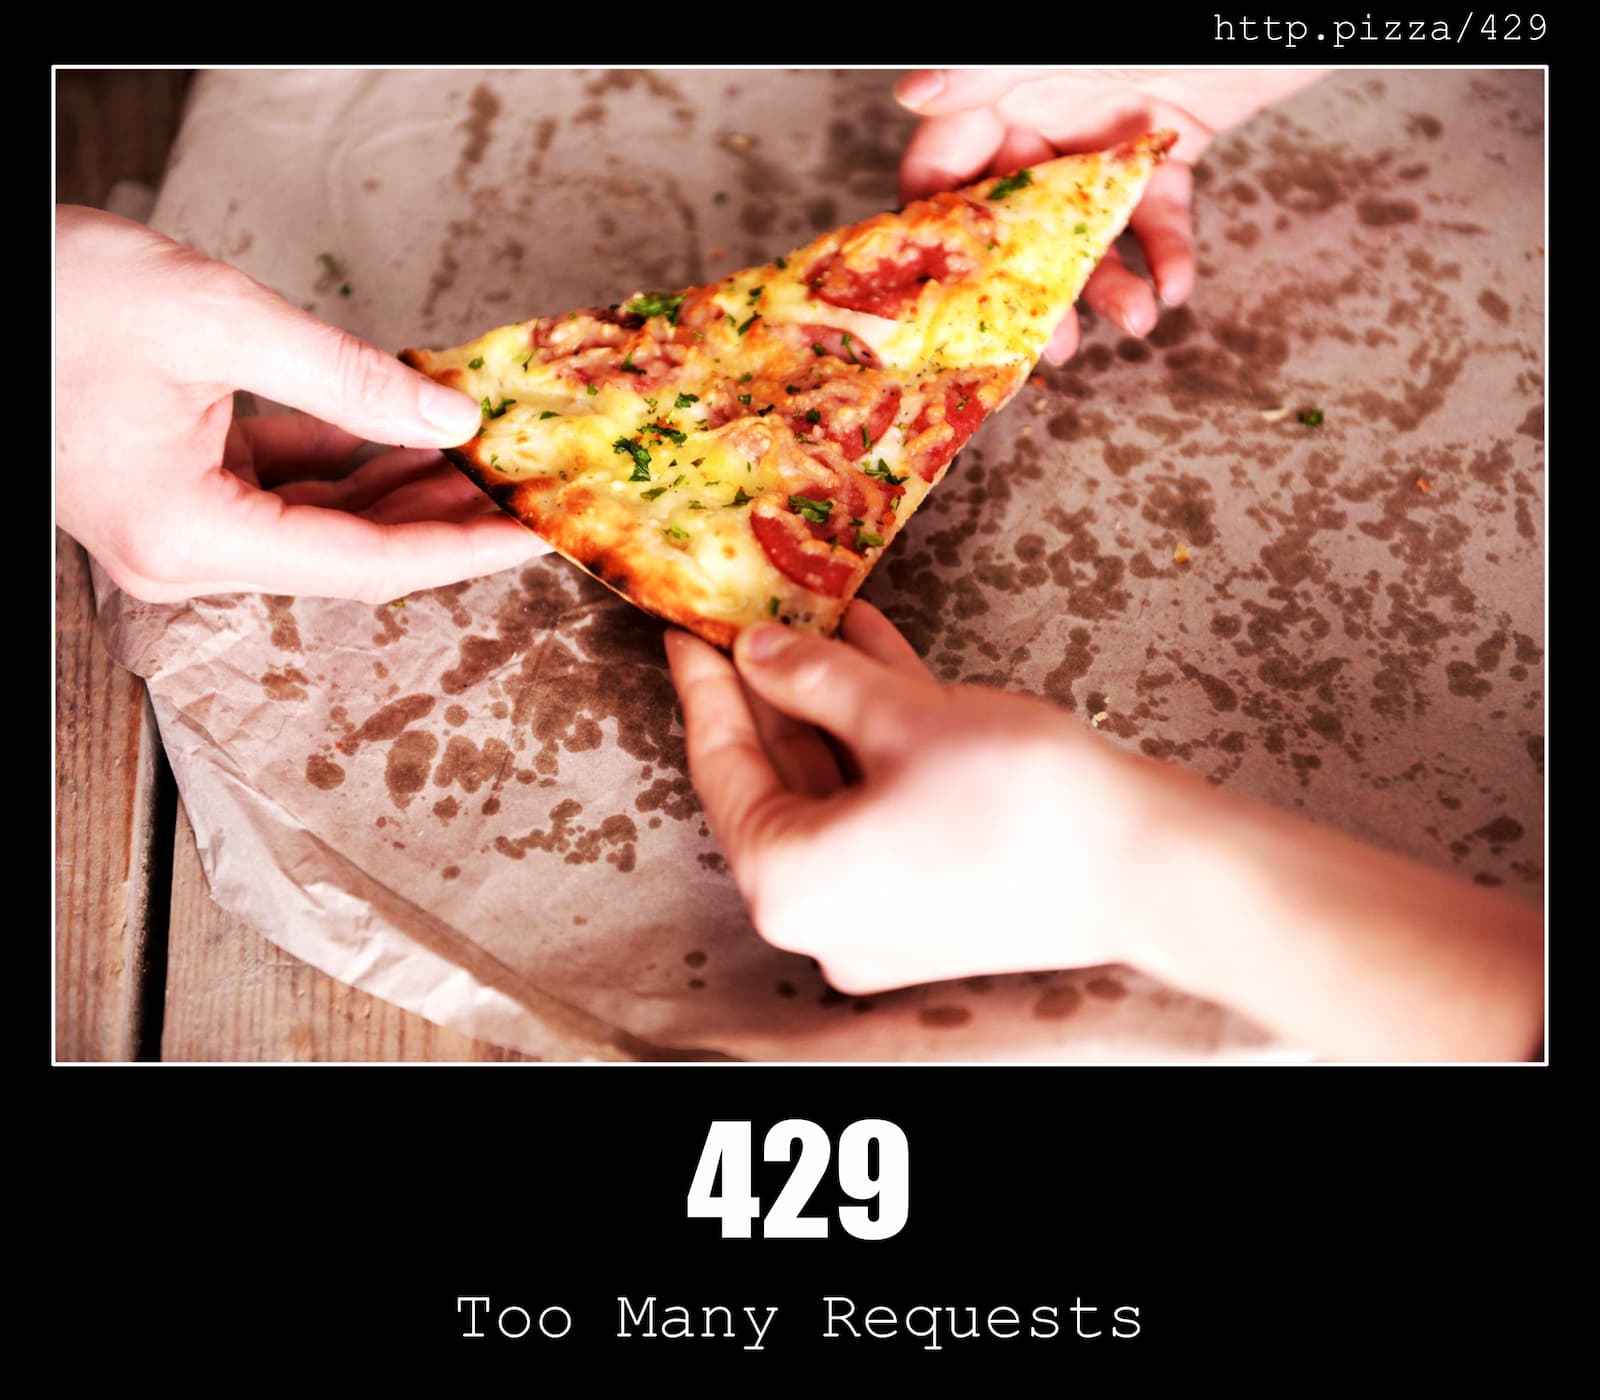 HTTP Status Code 429 Too Many Requests & Pizzas